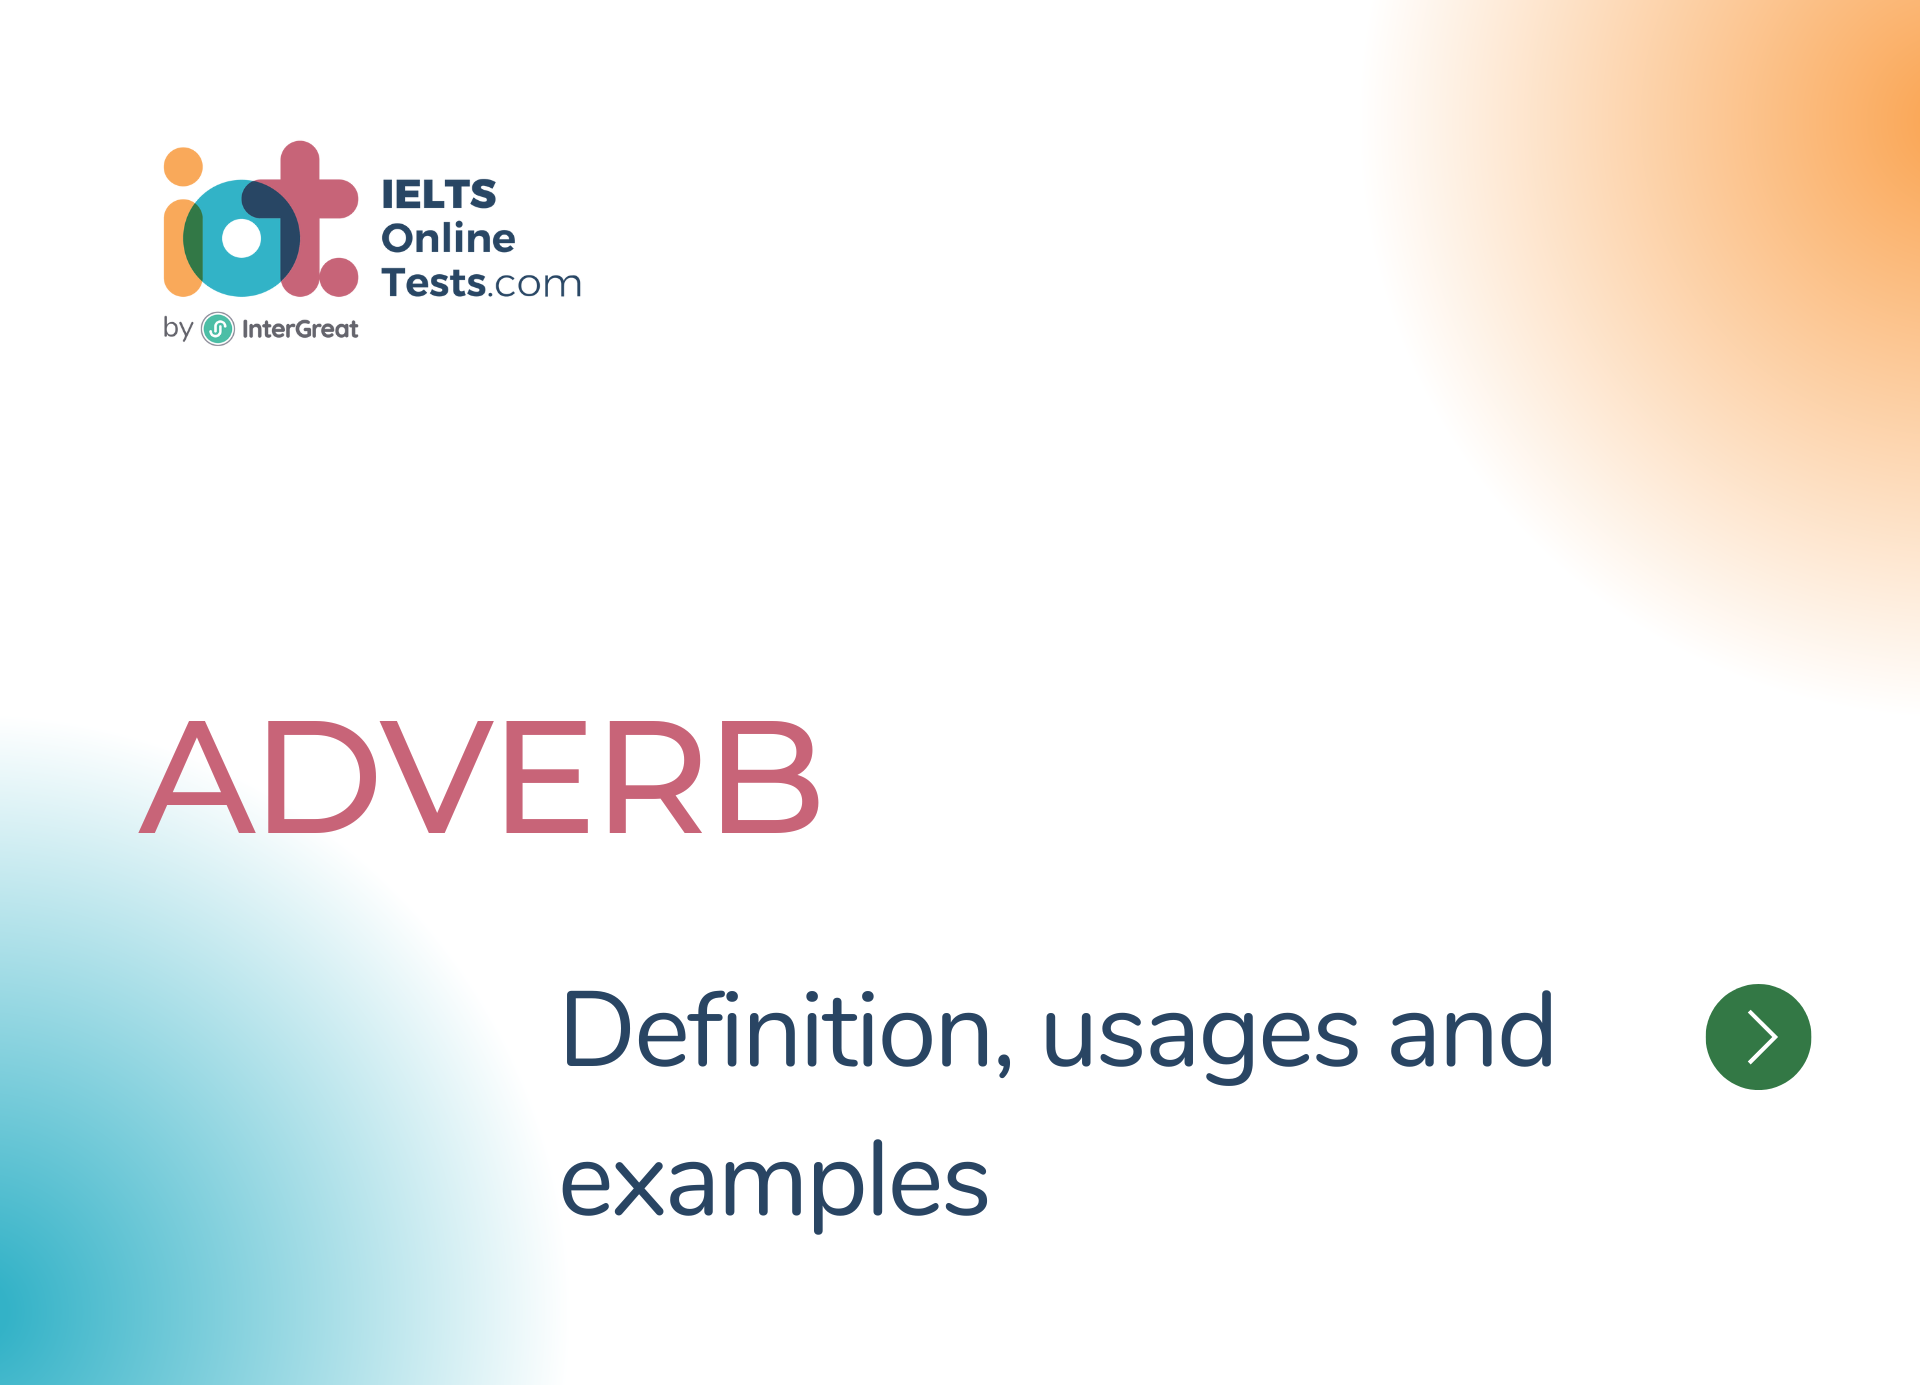 adverb-definition-usages-and-examples-ielts-online-tests